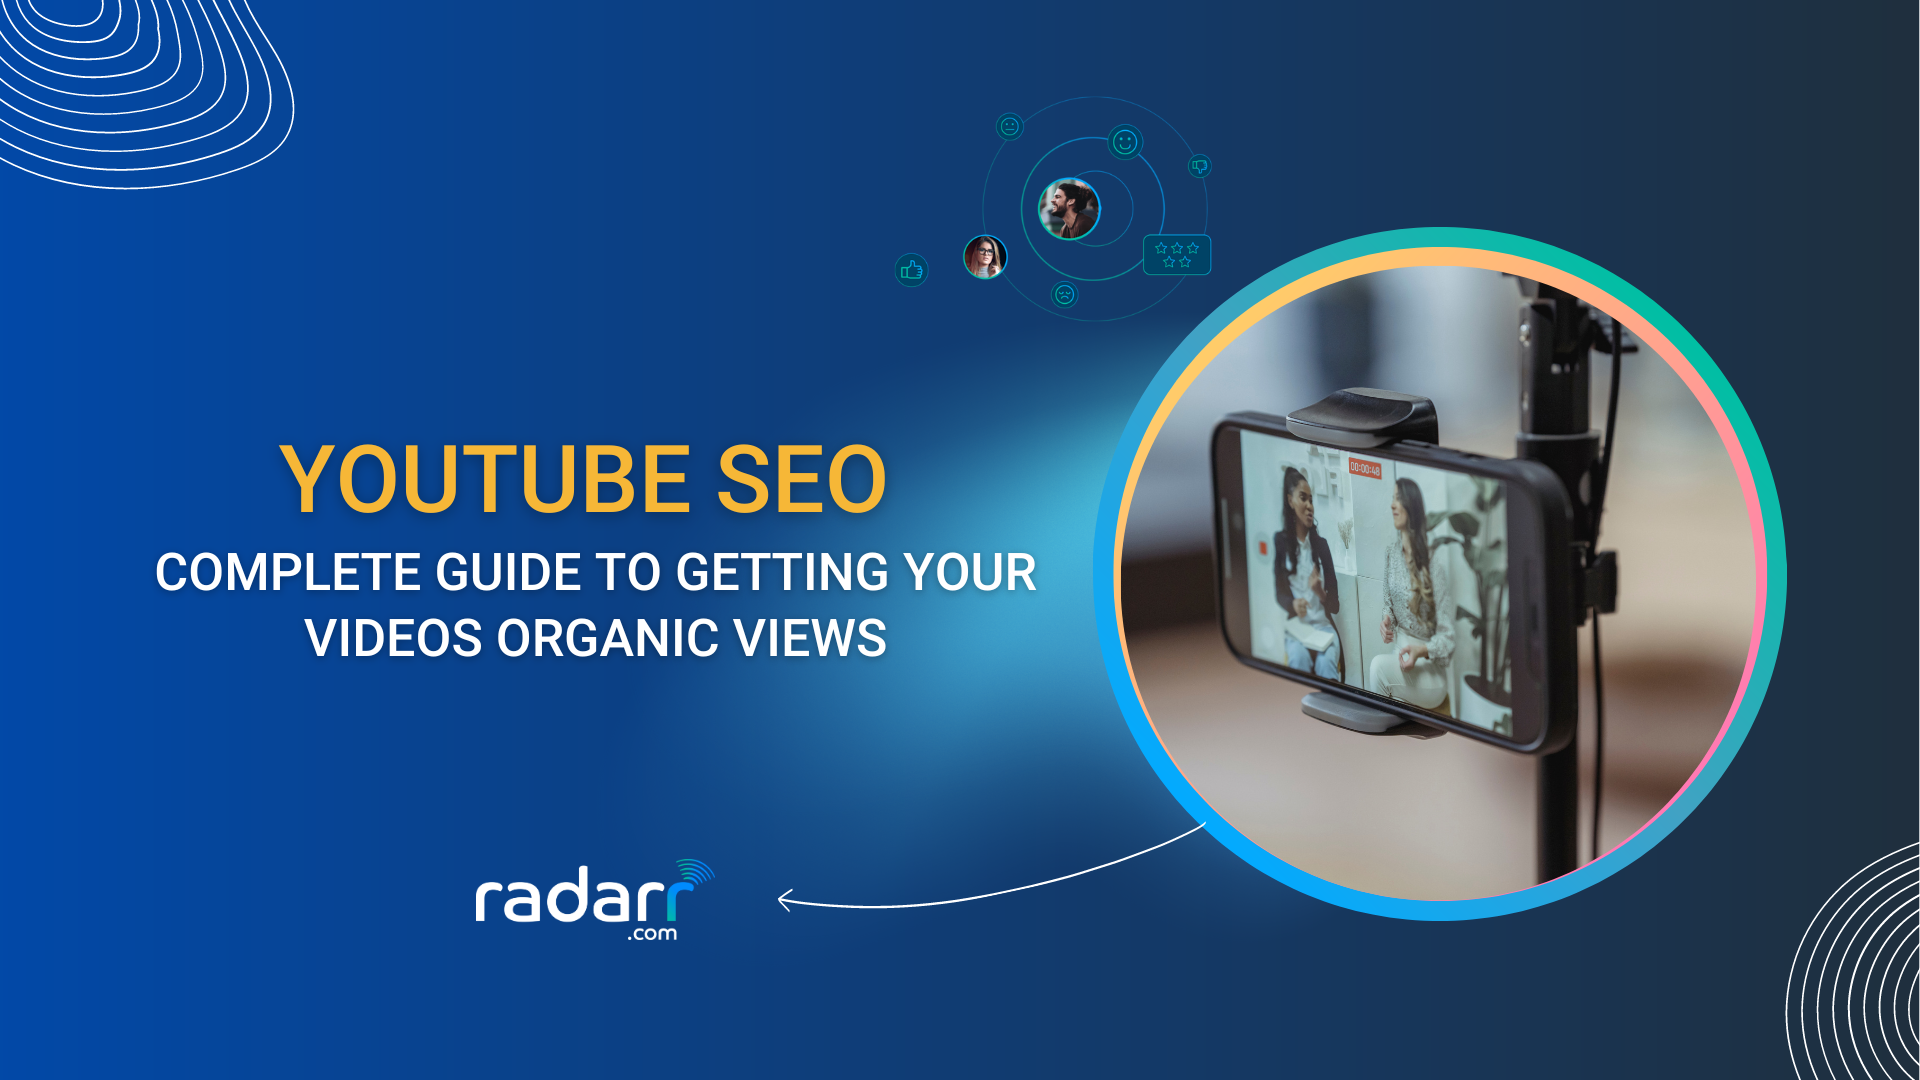 youtube seo strategy guide for brands